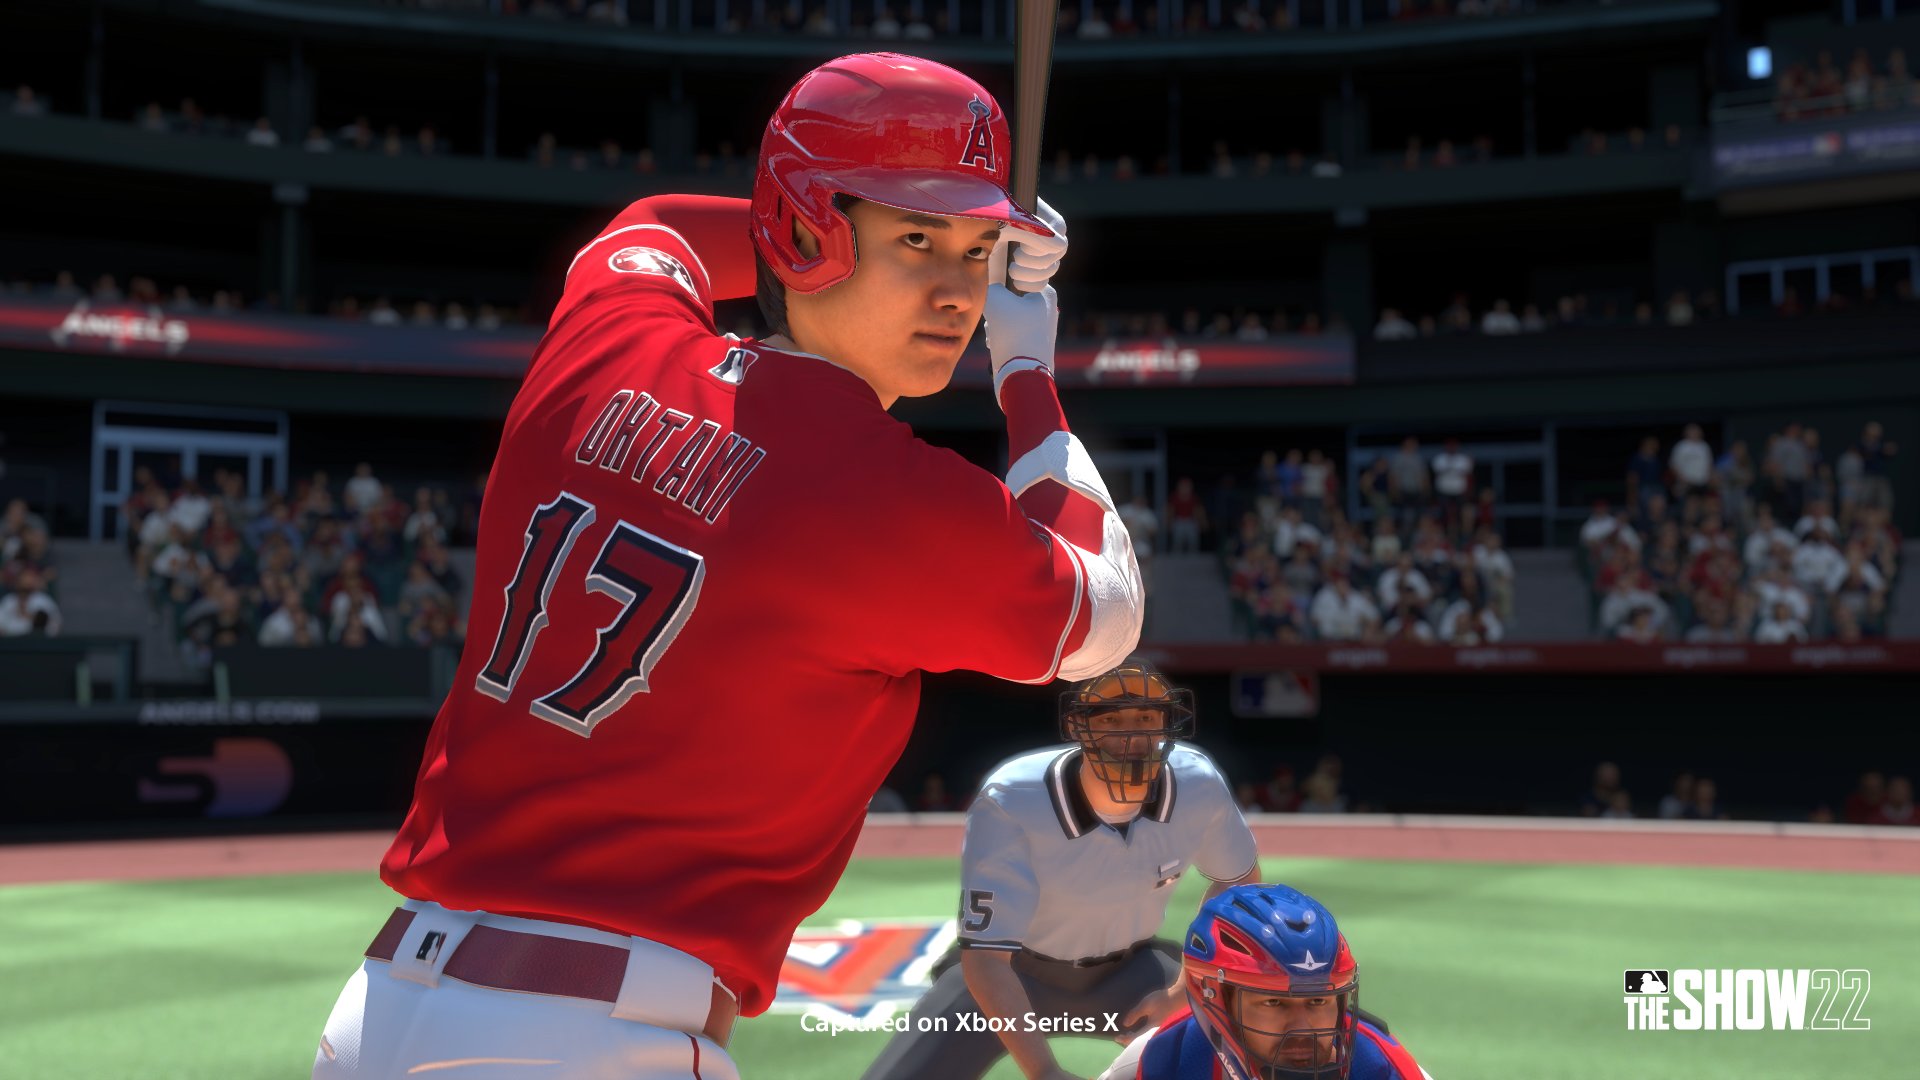 Next-Gen MLB The Show 21 - What Can Prior Next-Gen Launch Tell Us